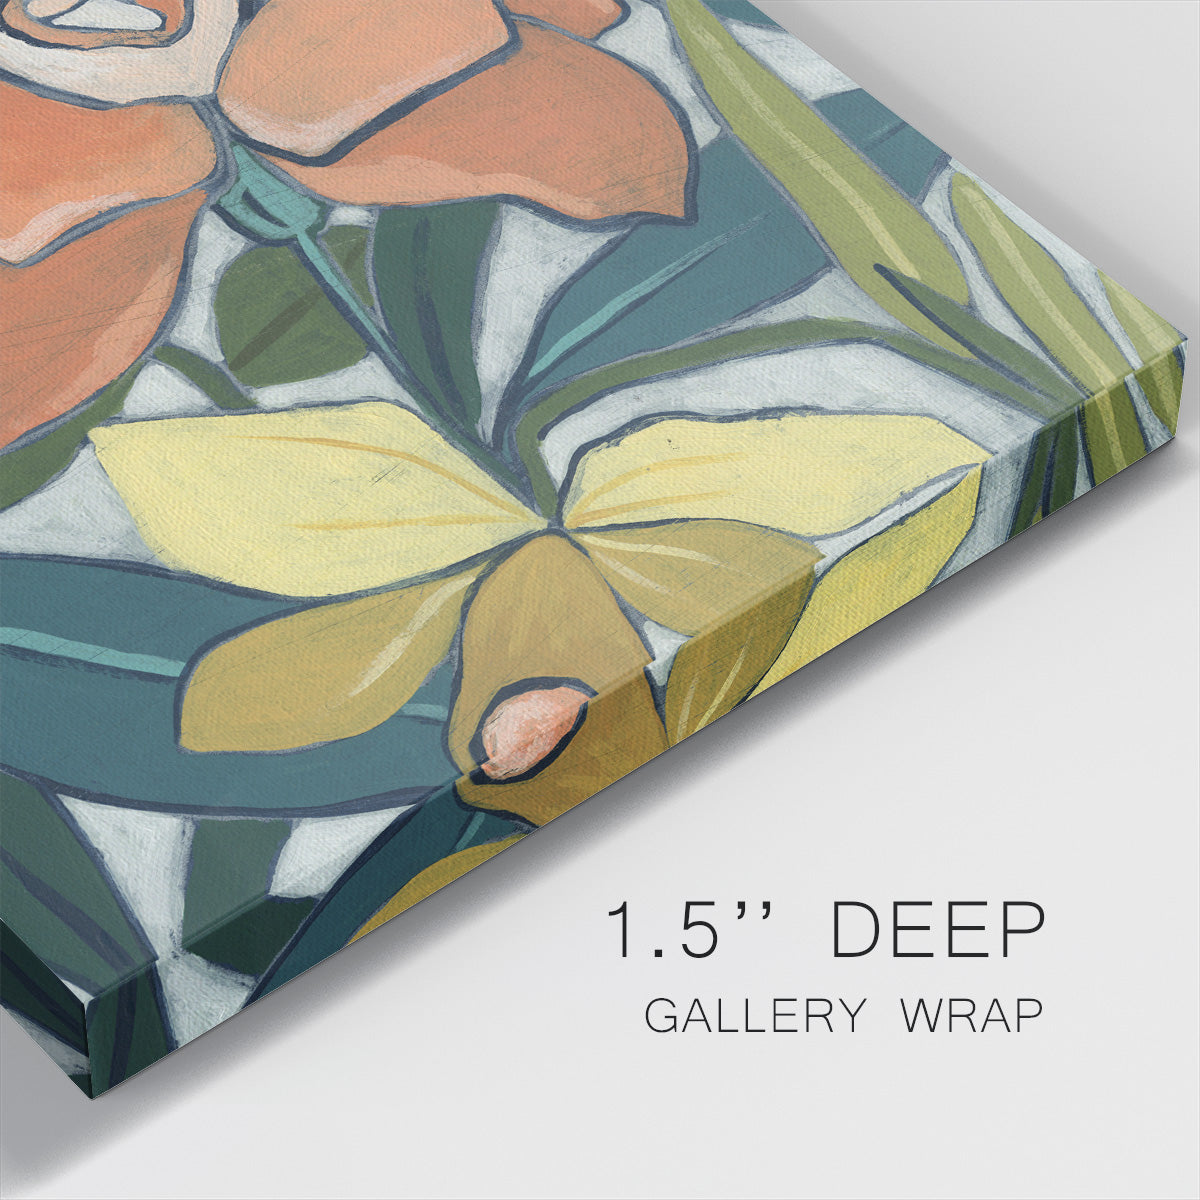 Window Box Garden I-Premium Gallery Wrapped Canvas - Ready to Hang